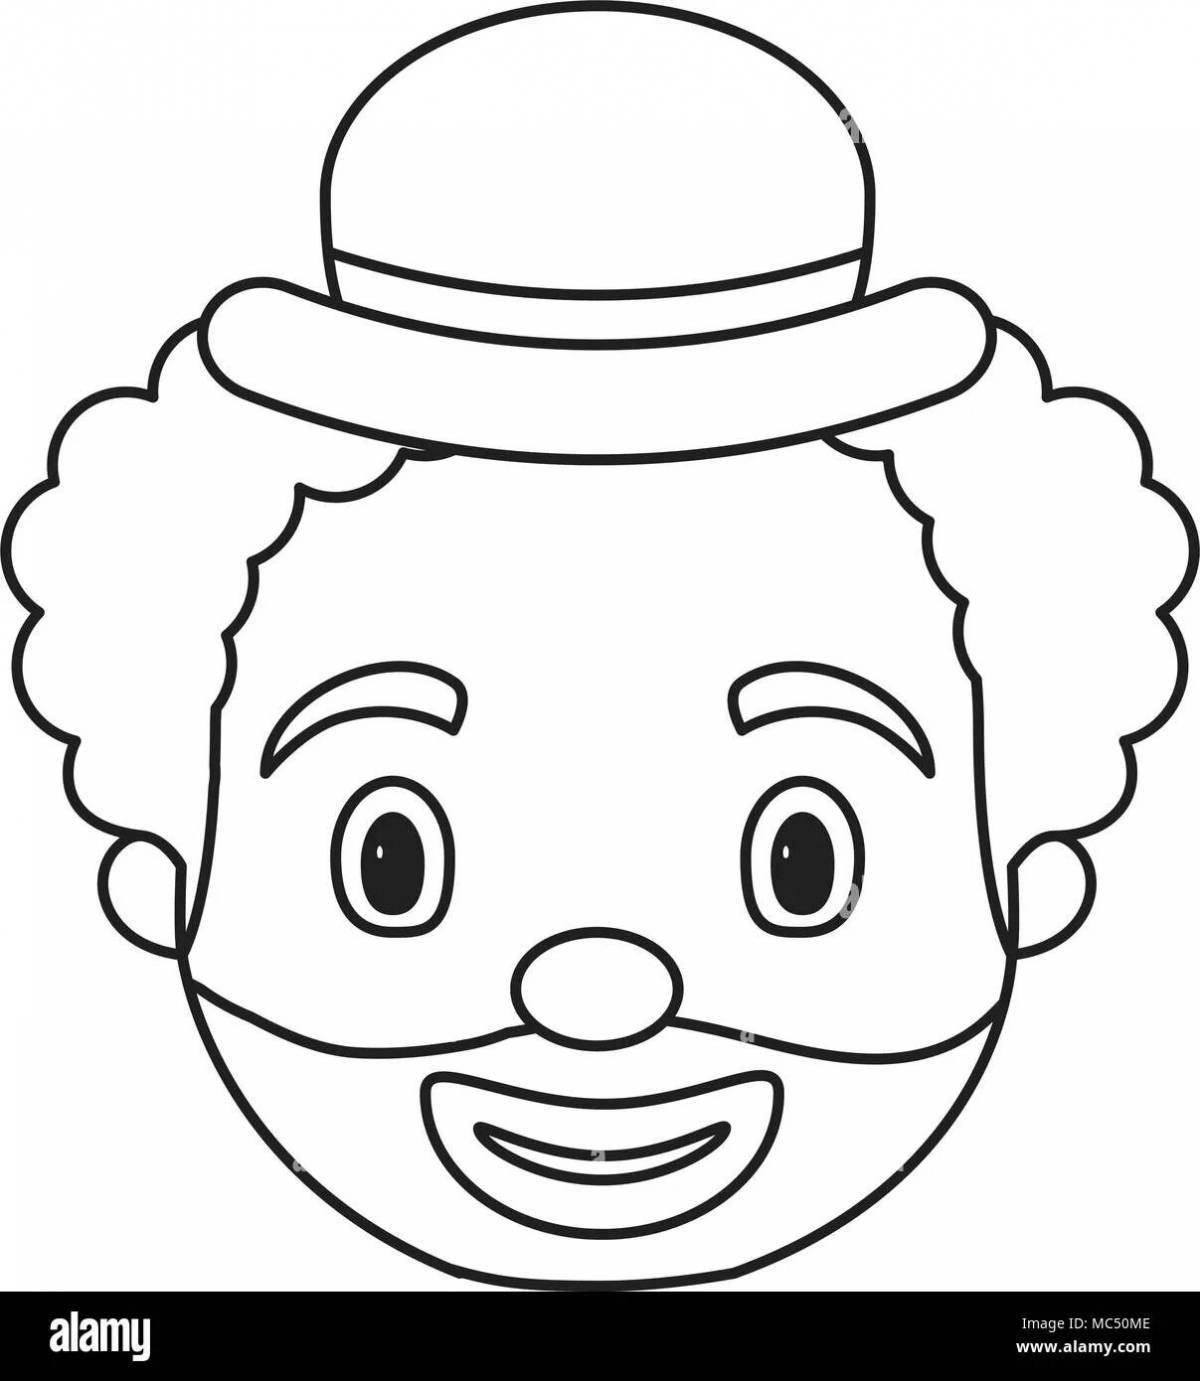 Playful clown face coloring page for kids